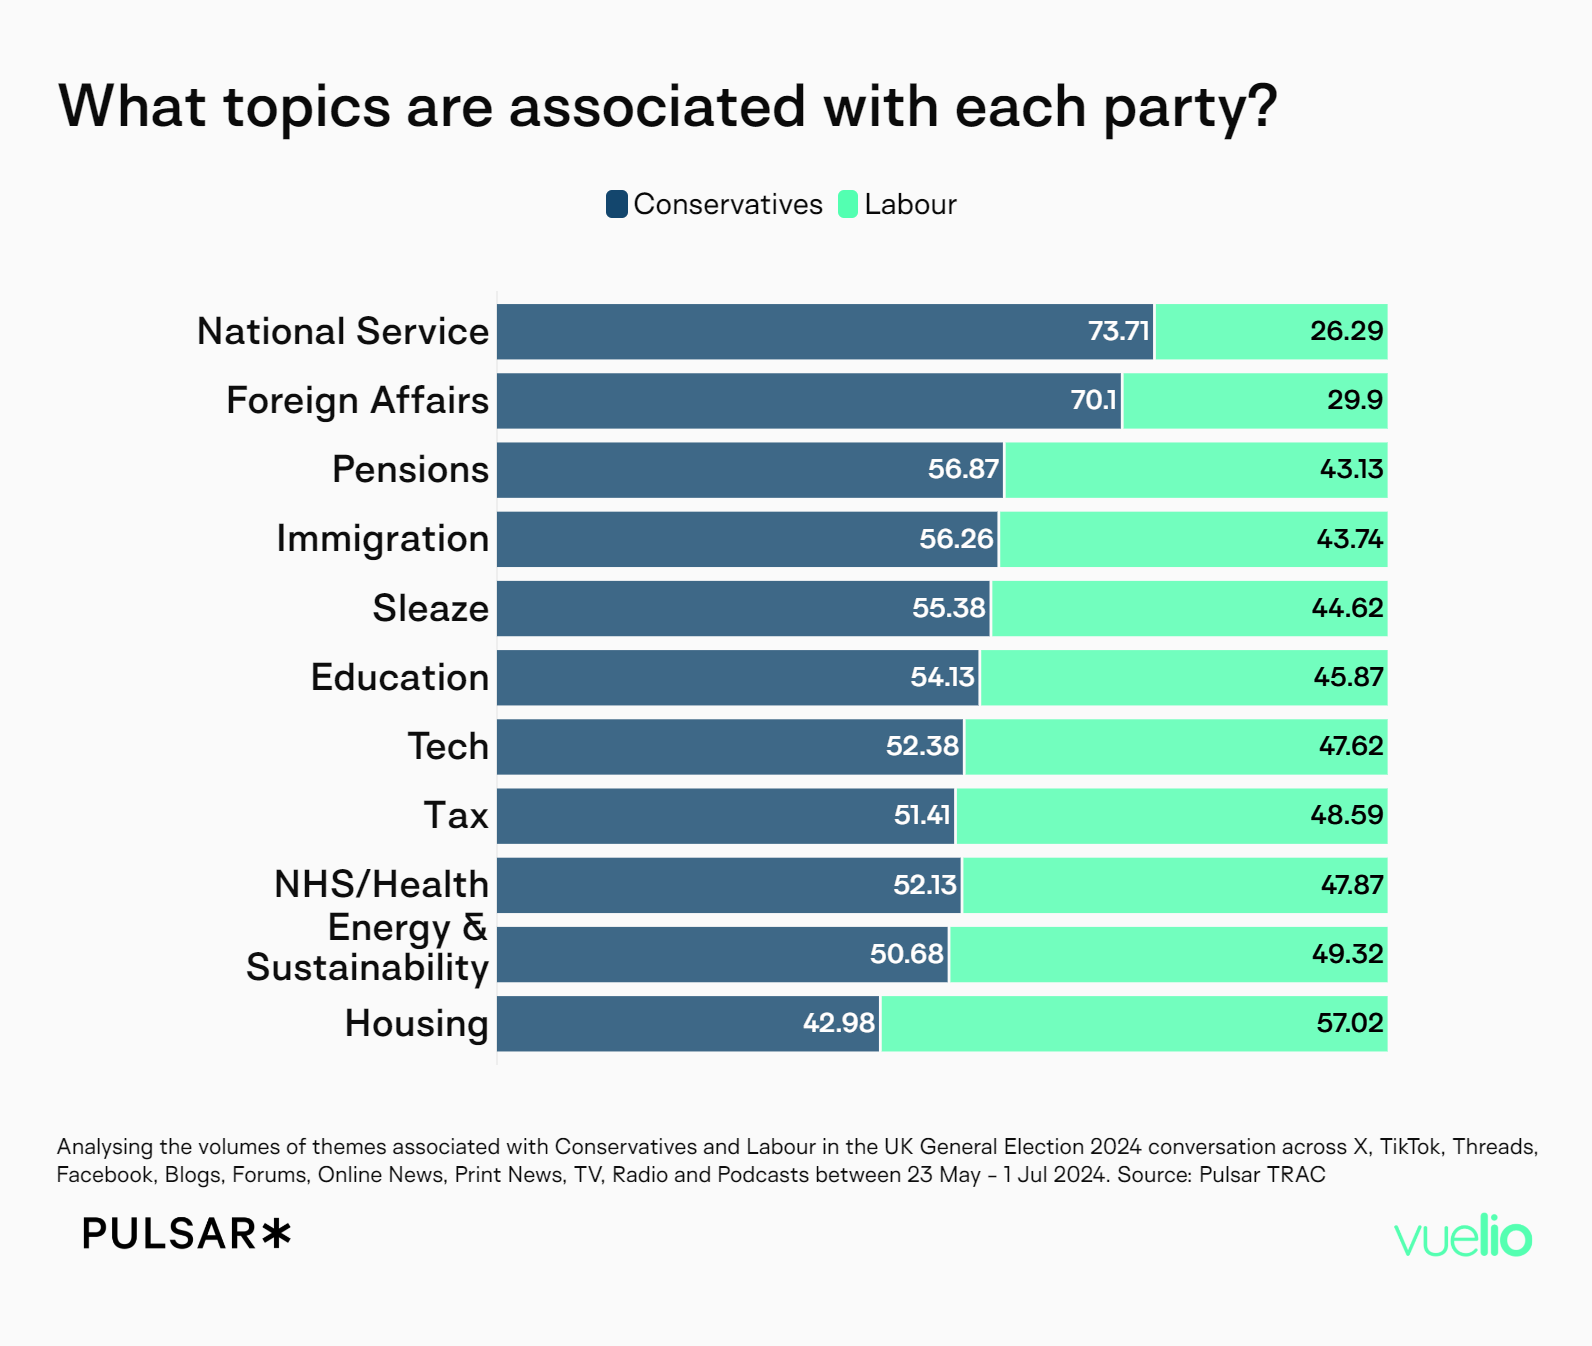 What topics are associated with each political party